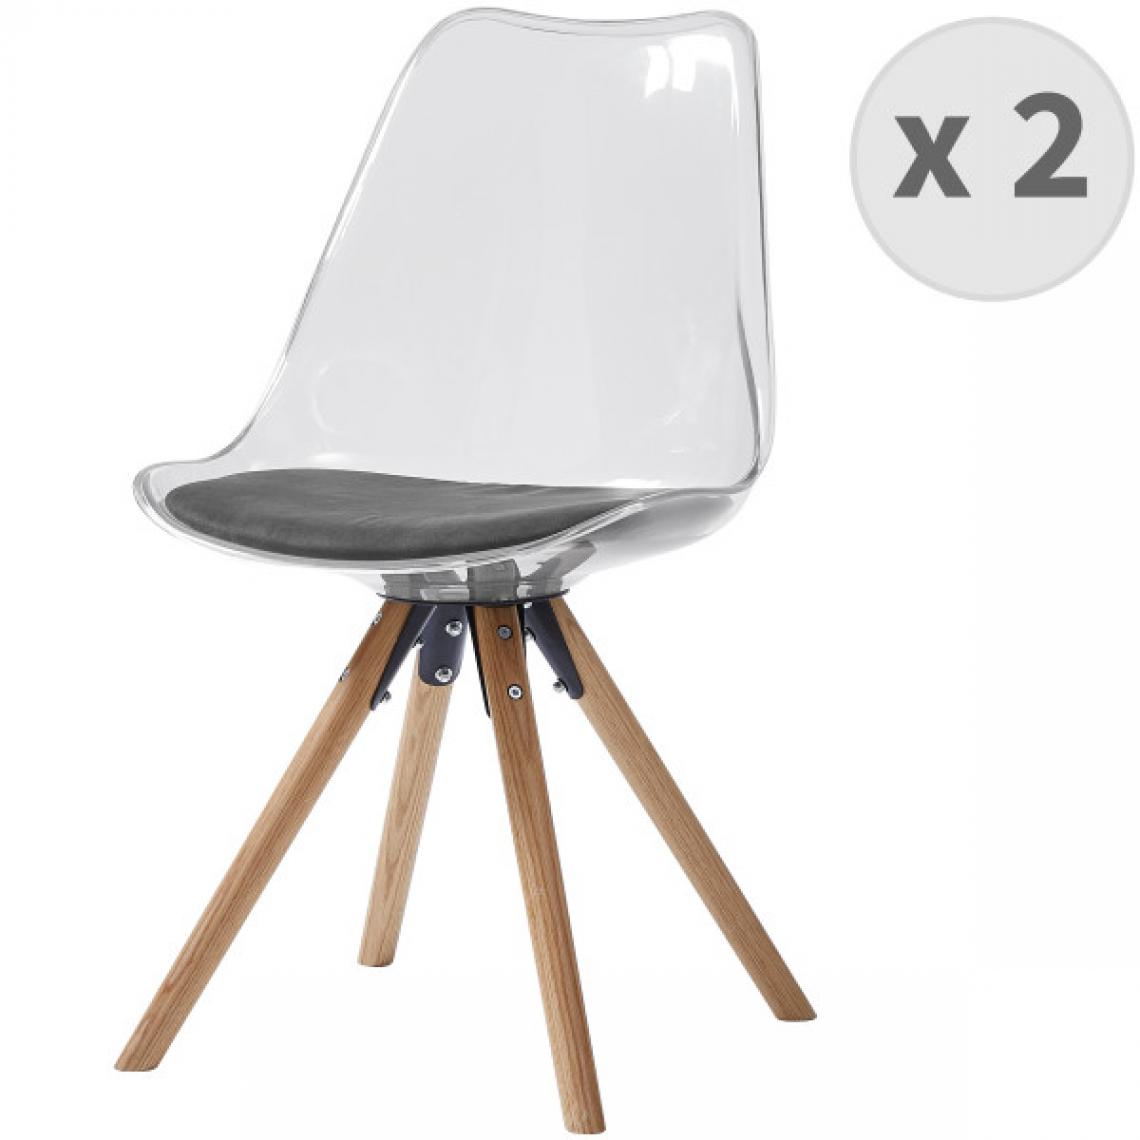 Moloo - ICE-Chaise design polycarbonate pieds chêne (x2) - Chaises